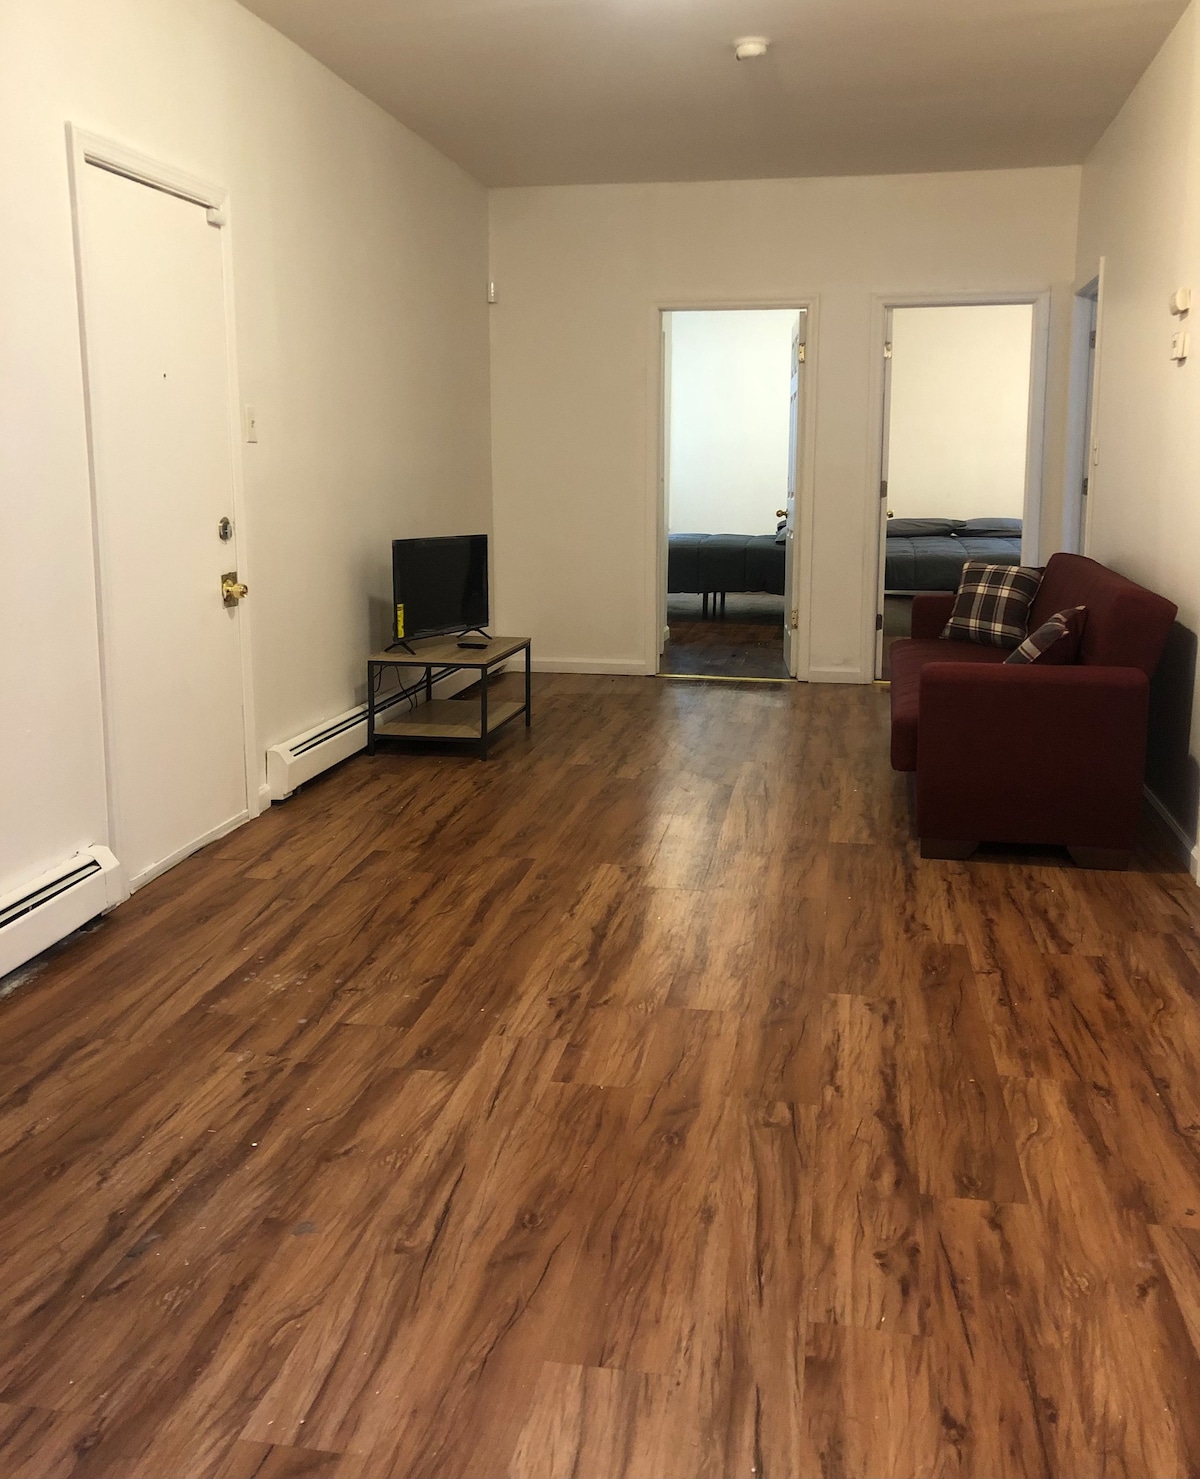 Private 2-bedroom apartment 10-mins to EWR